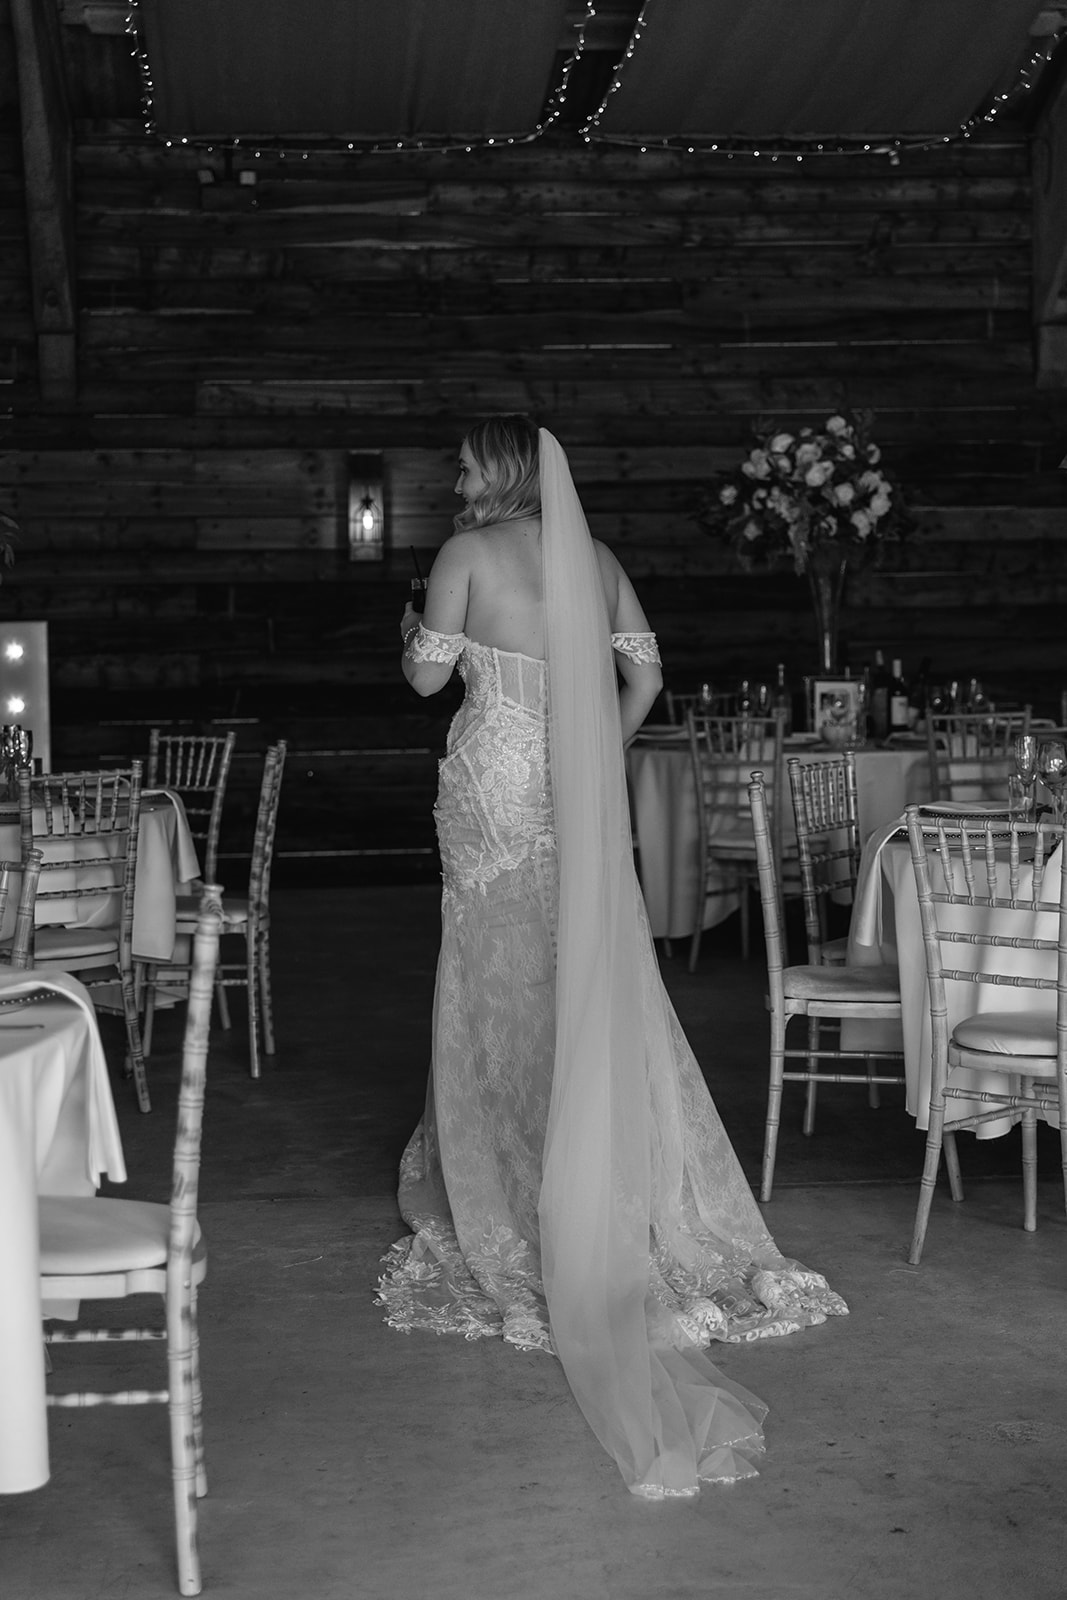 Bride at reception room at a Southlands barn wedding, Sussex. Photo by OliveJoy Photography.